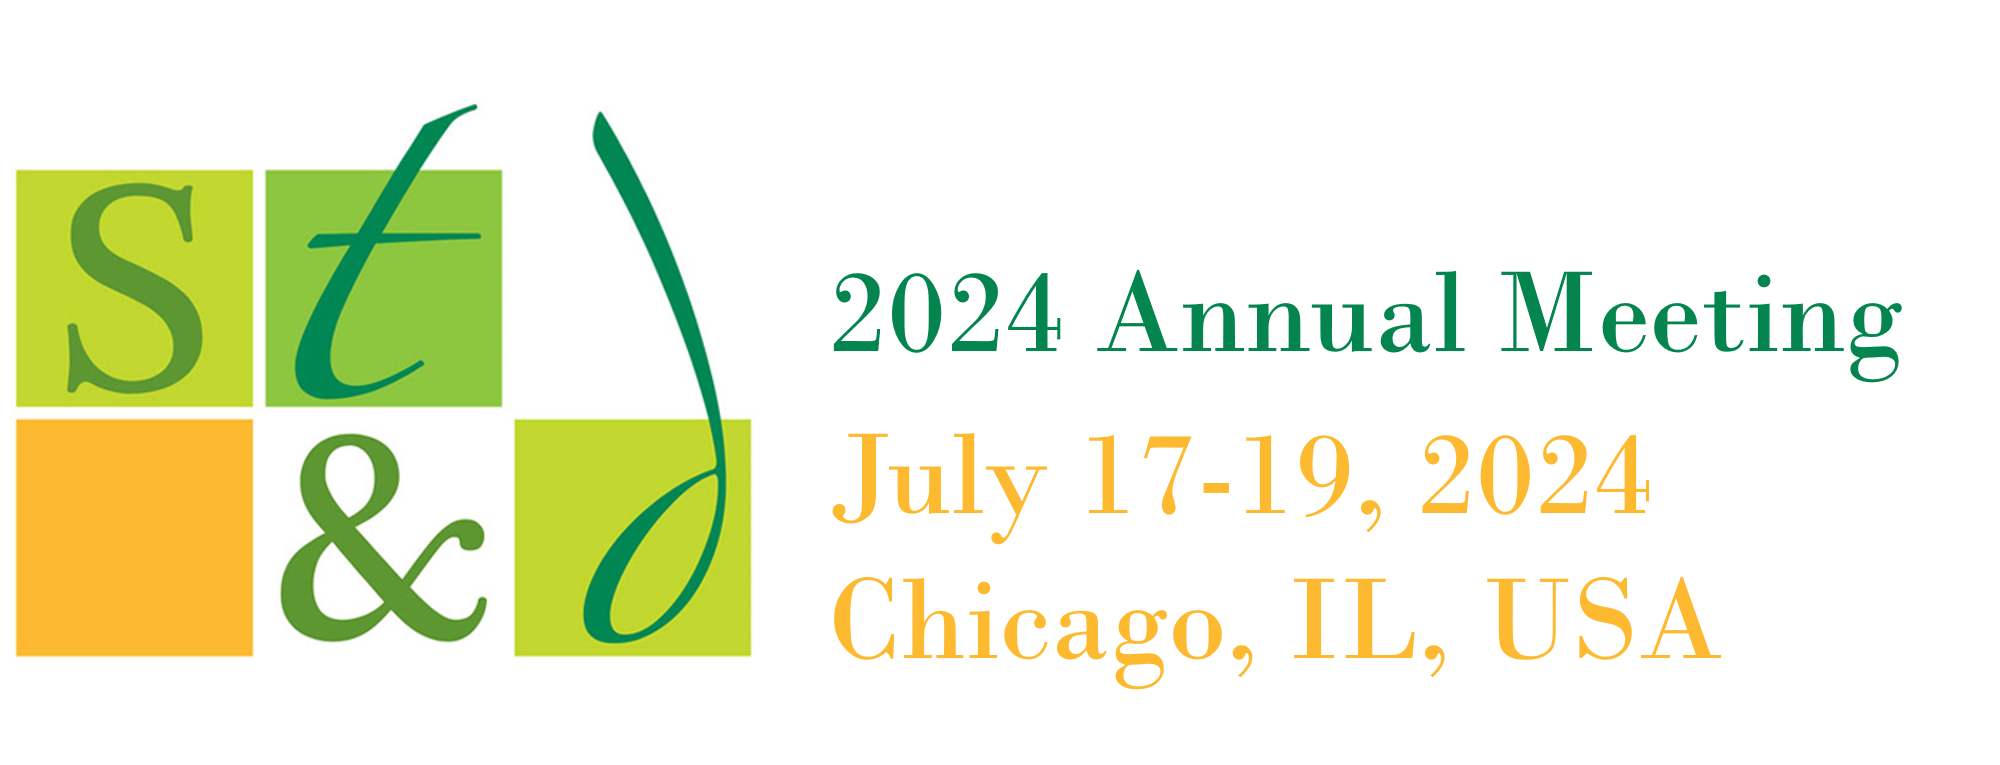 Header announcing the 2024 Annual Meeting, July 17-19, 2024, in Chicago, IL, USA